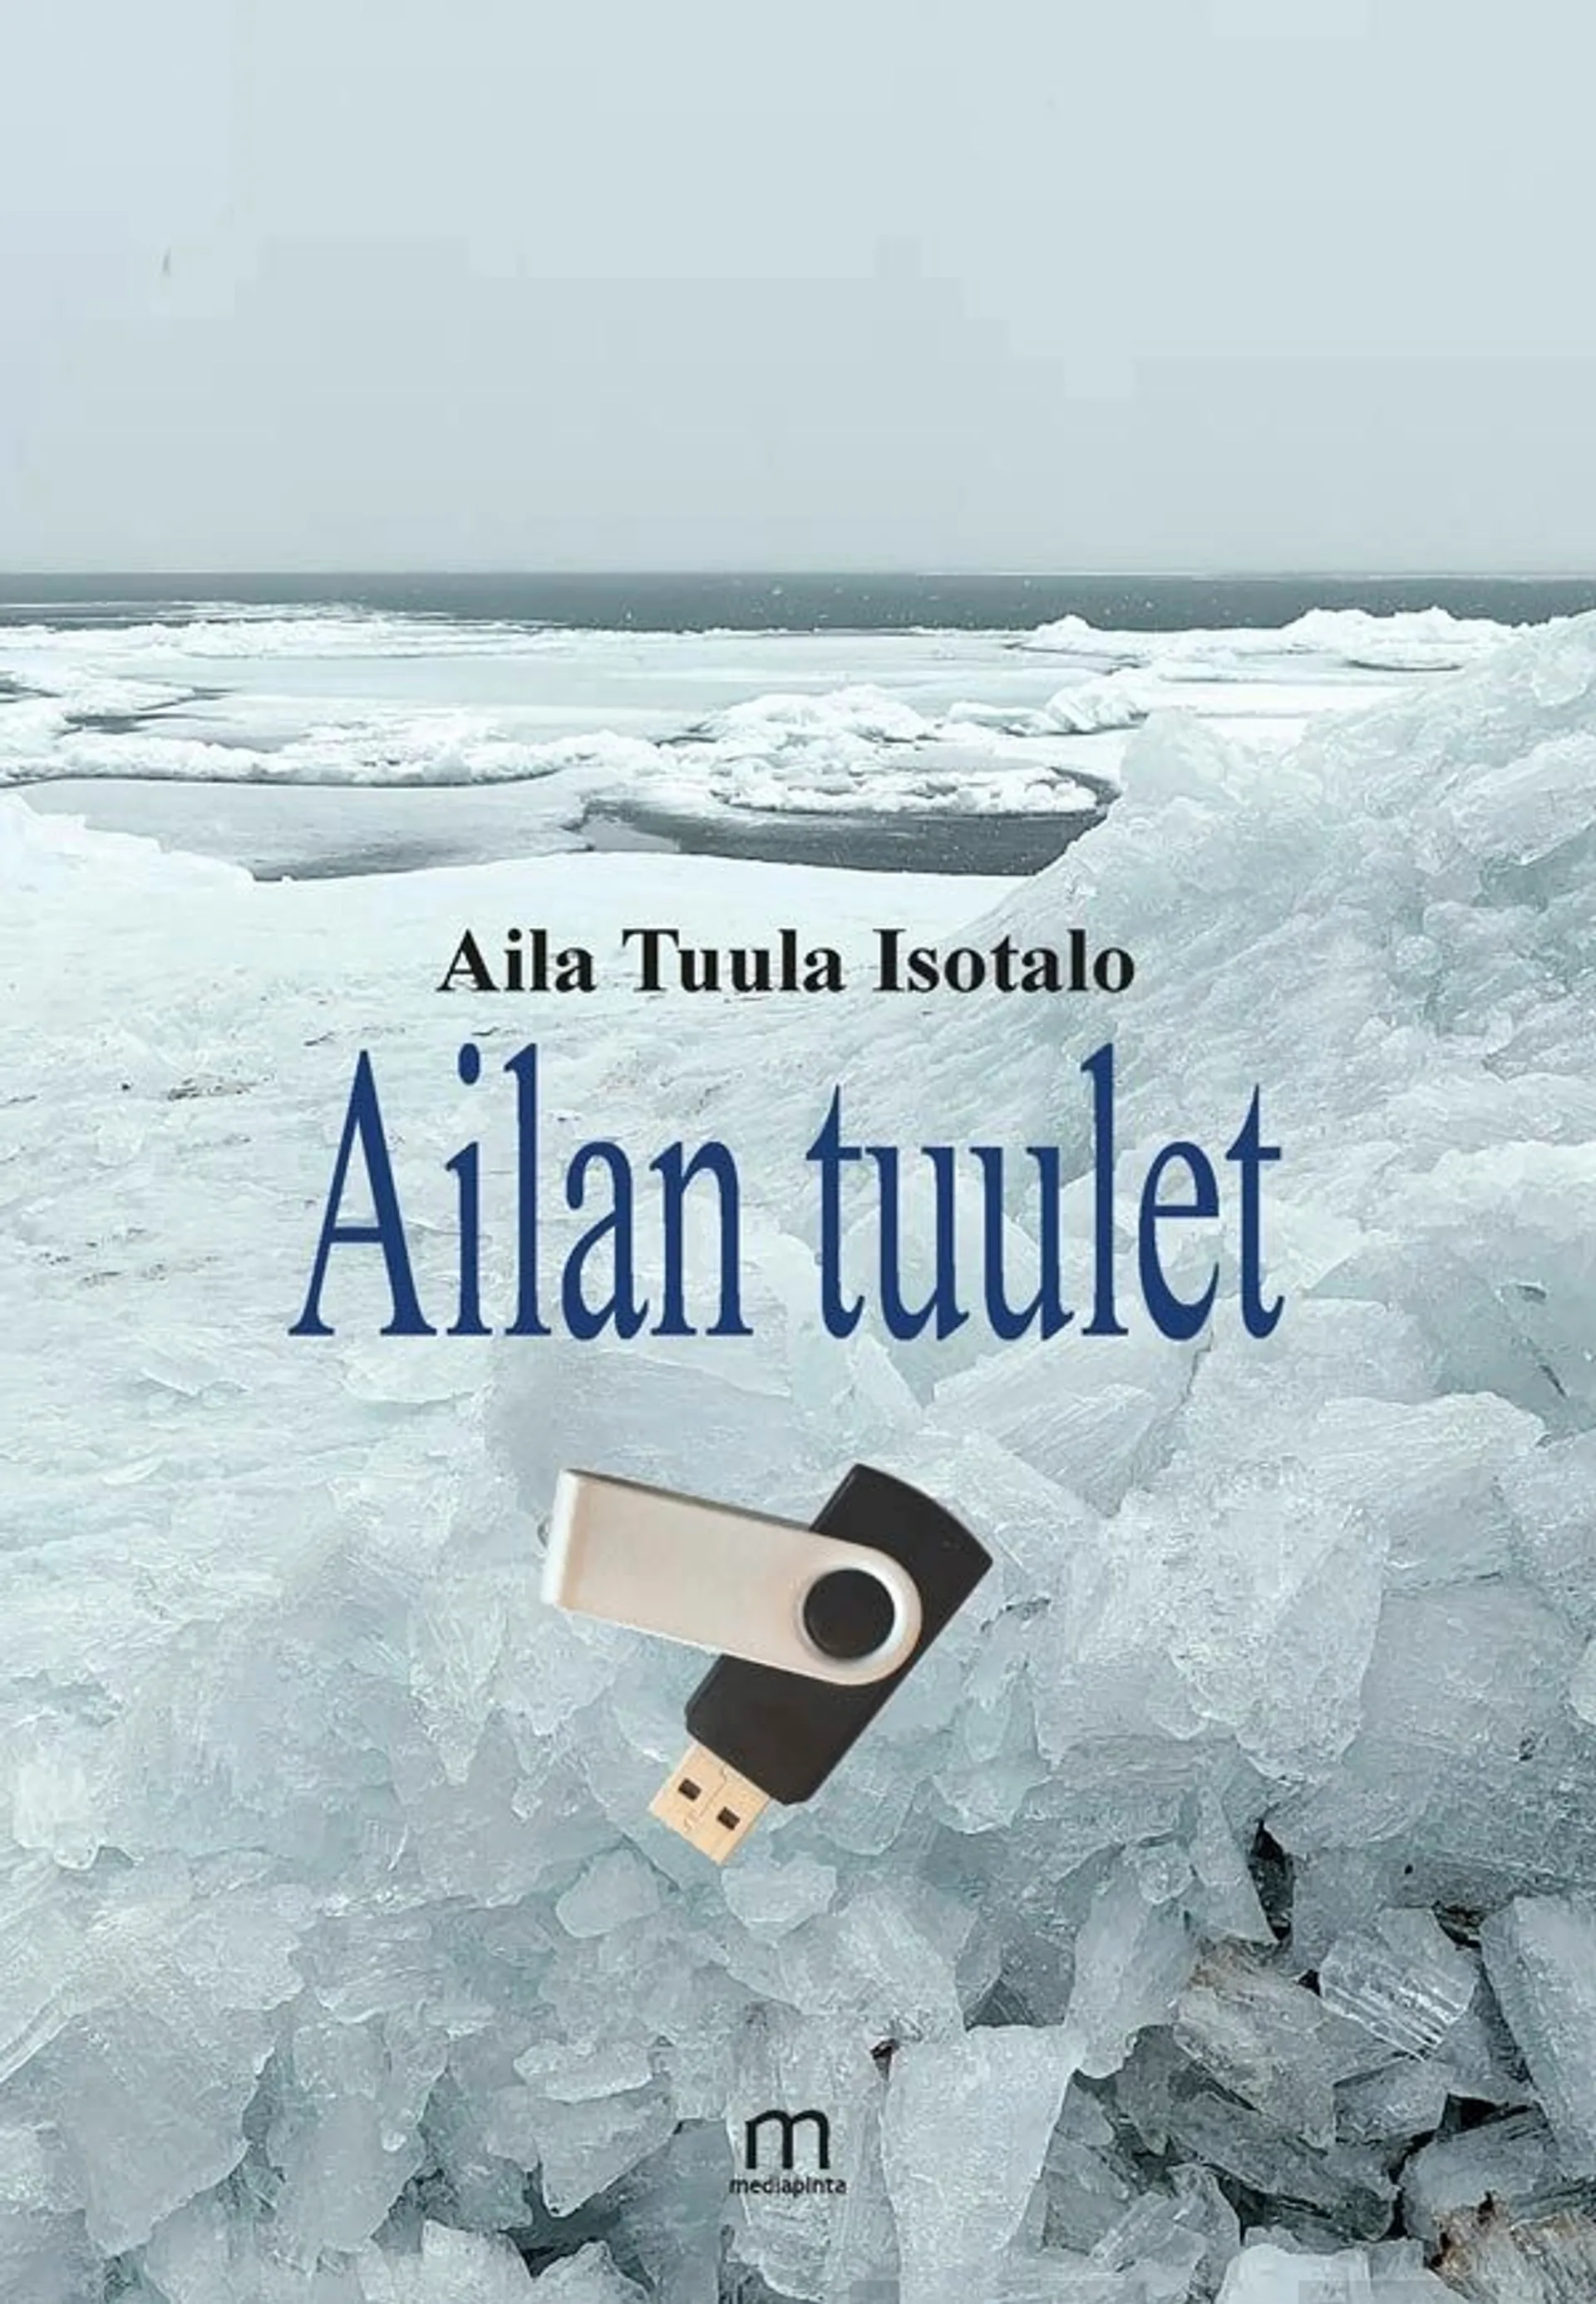 Isotalo, Ailan tuulet